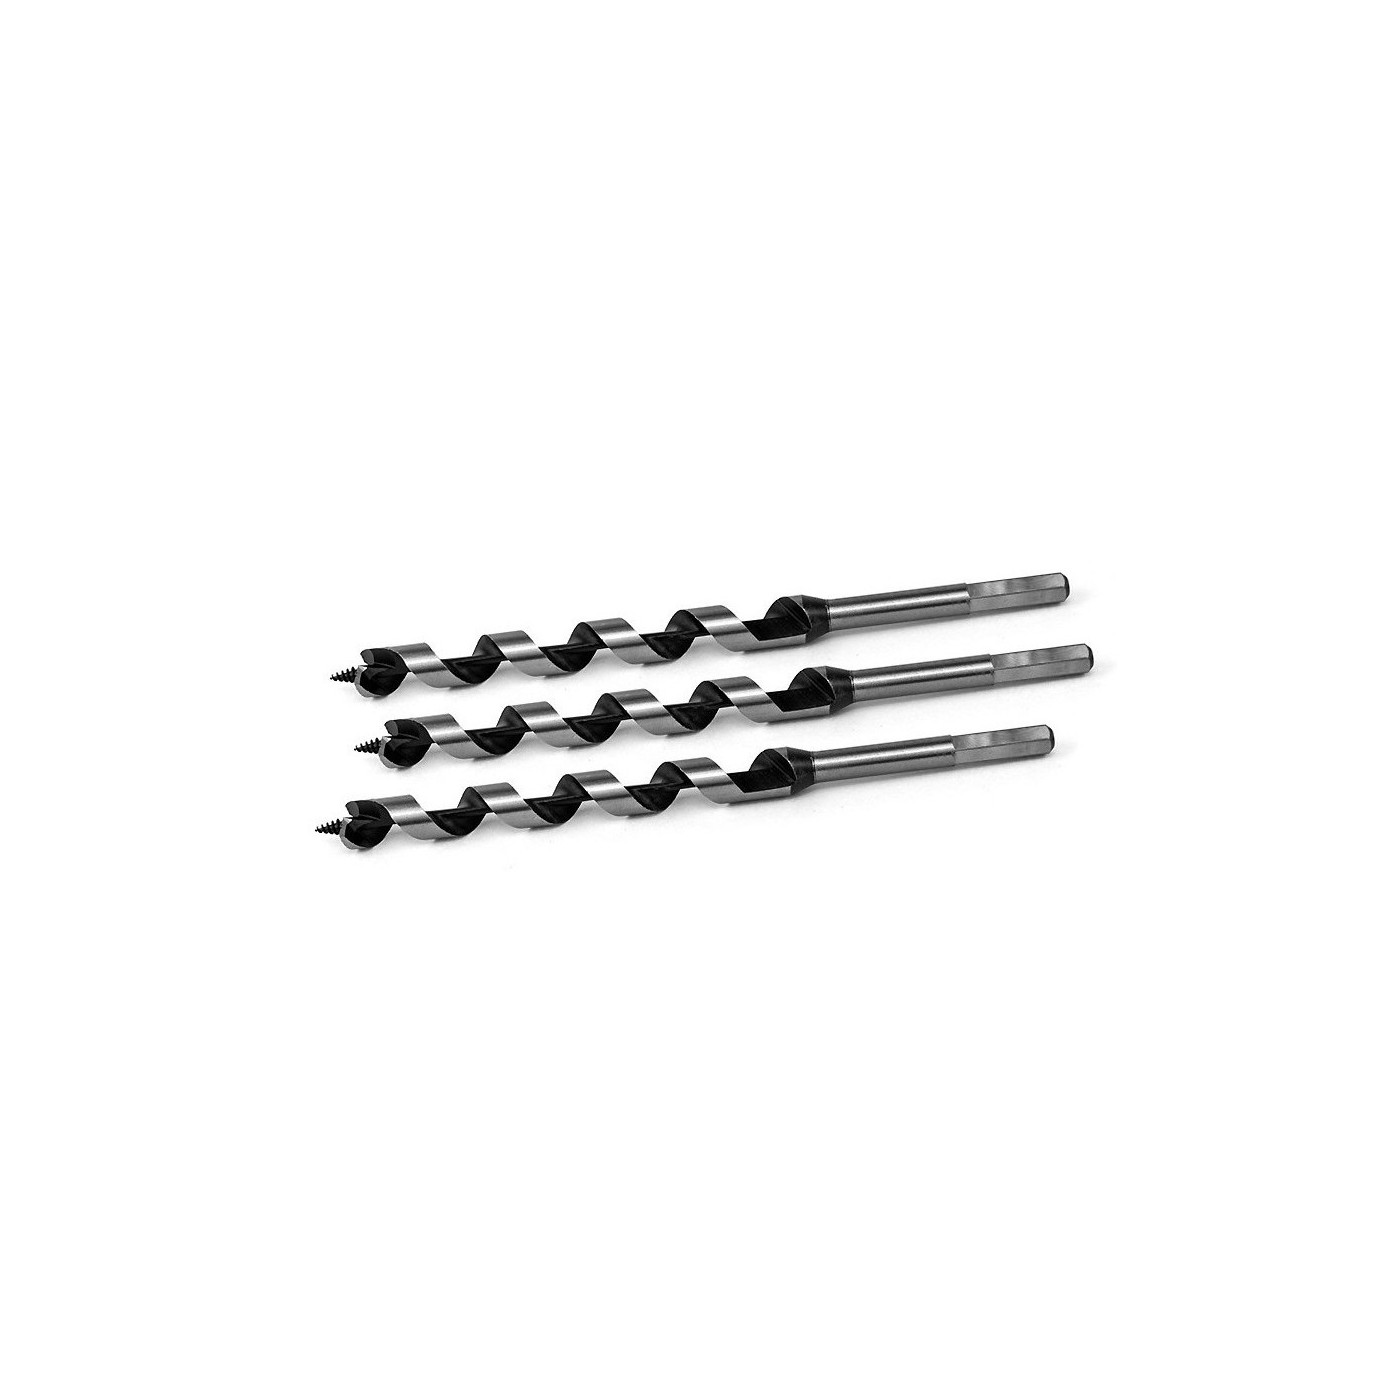 Set of 3 auger drill bits for wood, 24x230 mm